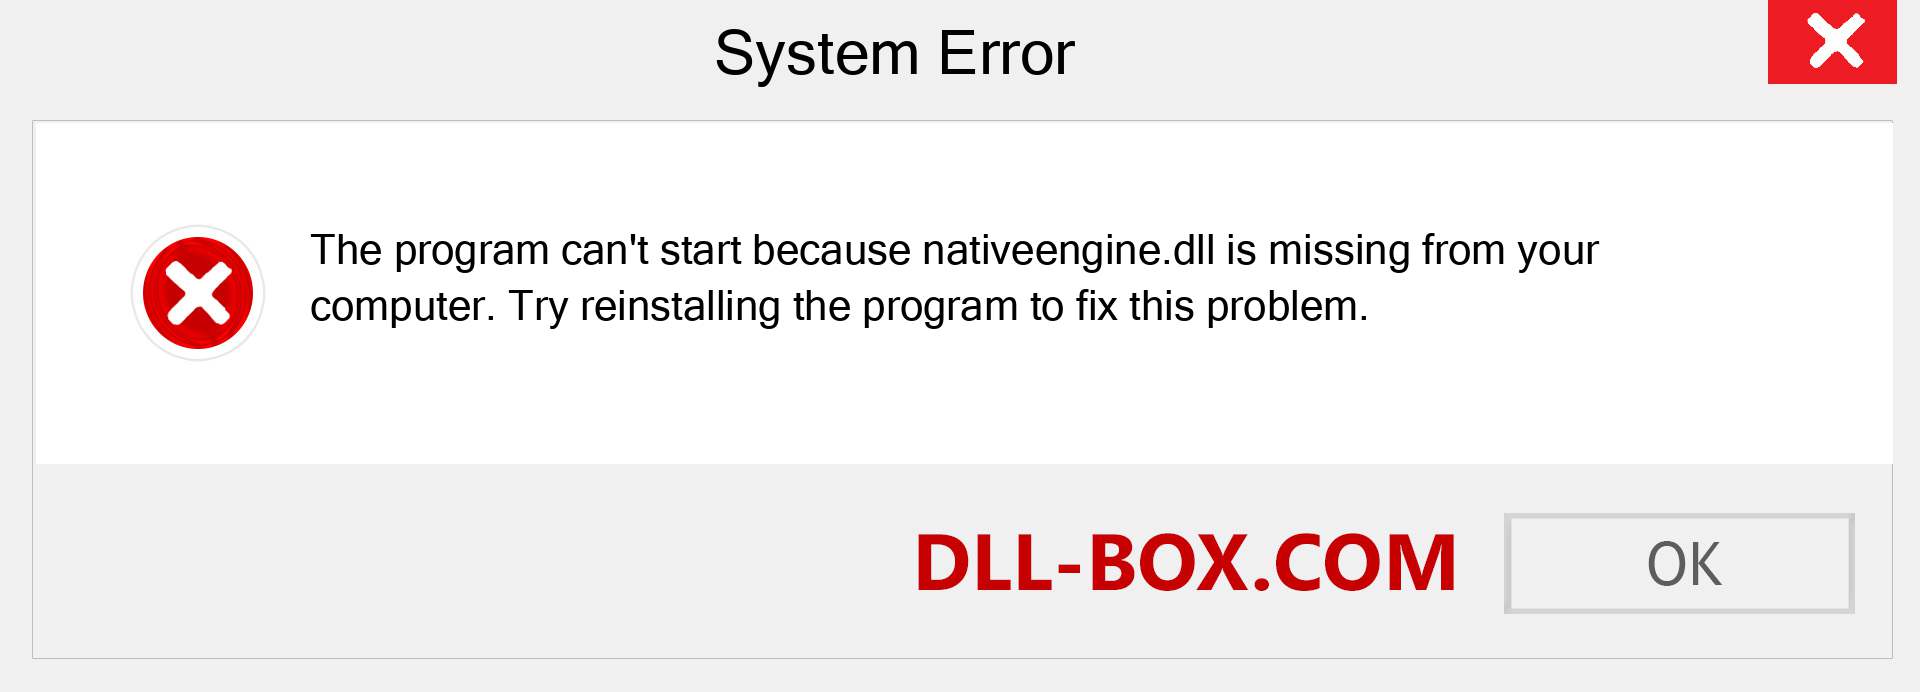  nativeengine.dll file is missing?. Download for Windows 7, 8, 10 - Fix  nativeengine dll Missing Error on Windows, photos, images